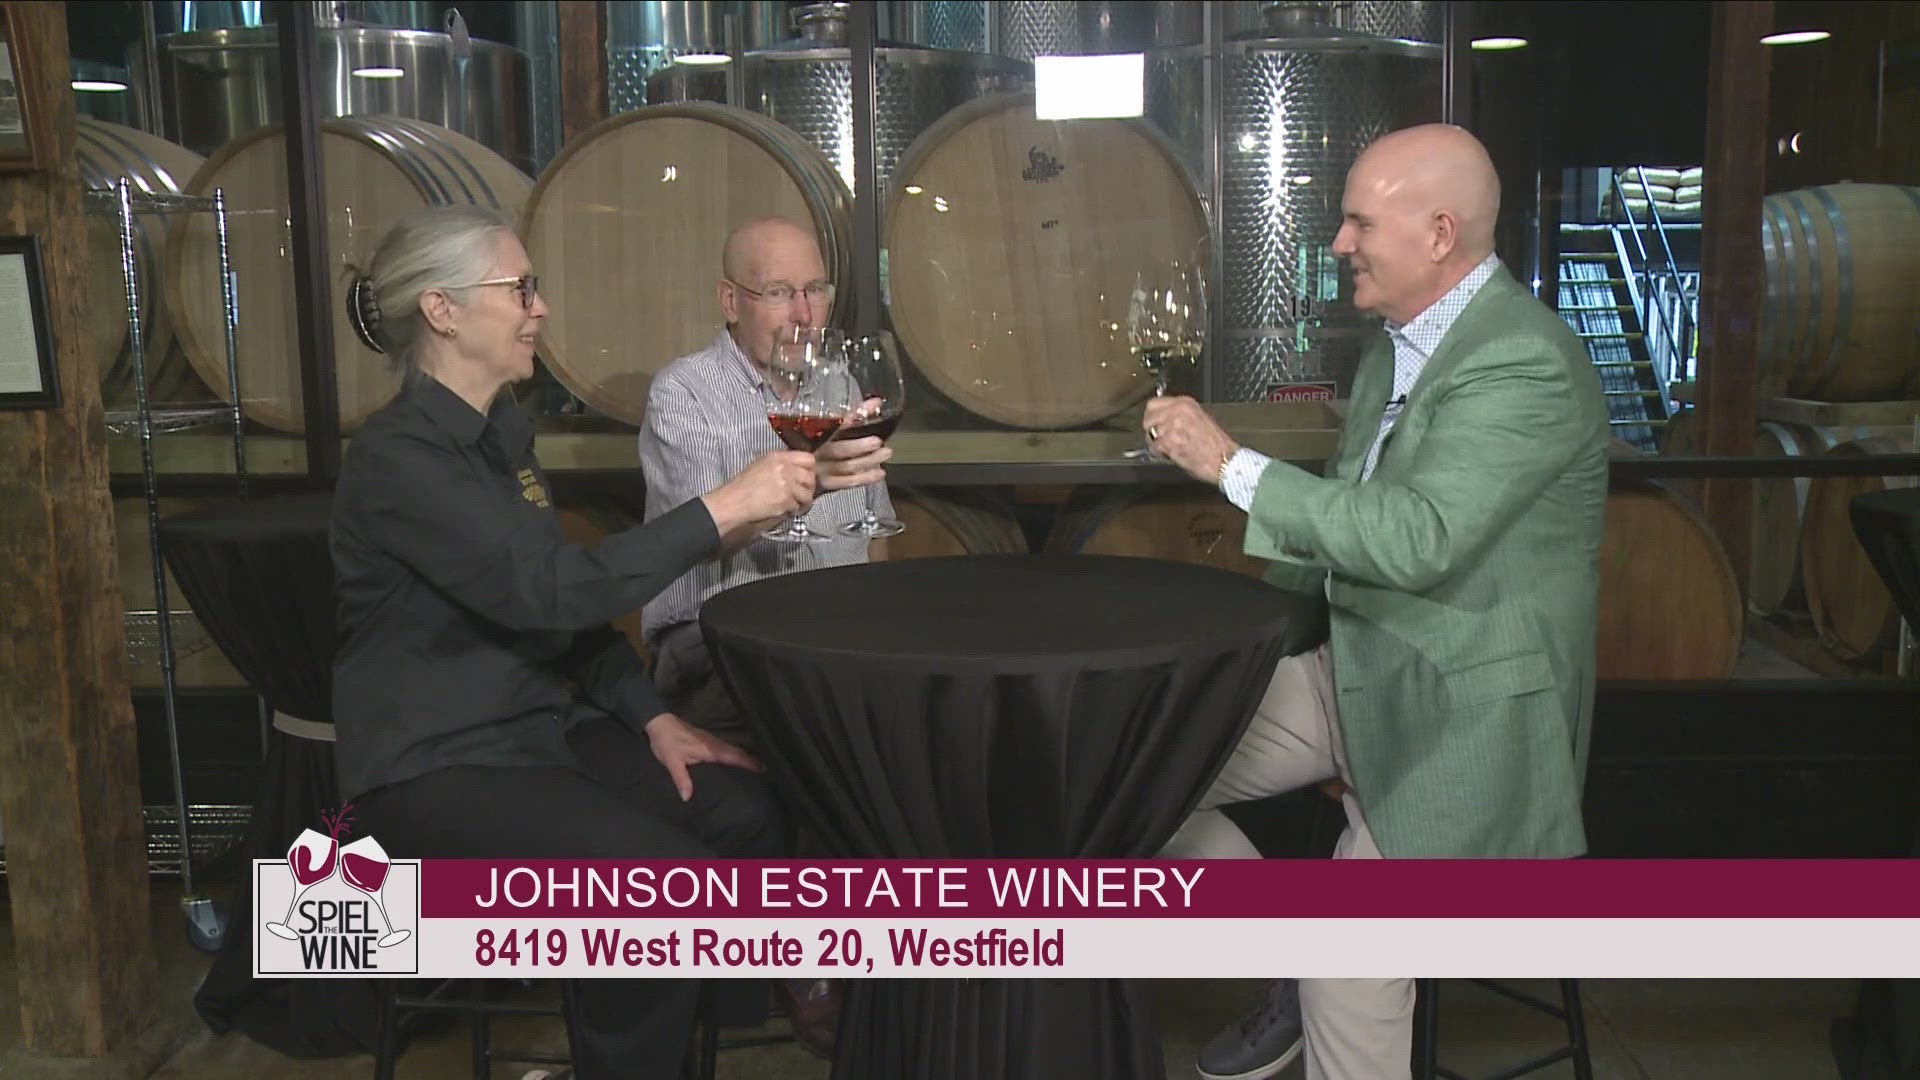 Spiel the Wine -- June 29 -- Segment 1 THIS VIDEO IS SPONSORED BY JOHNSON ESTATE WINERY